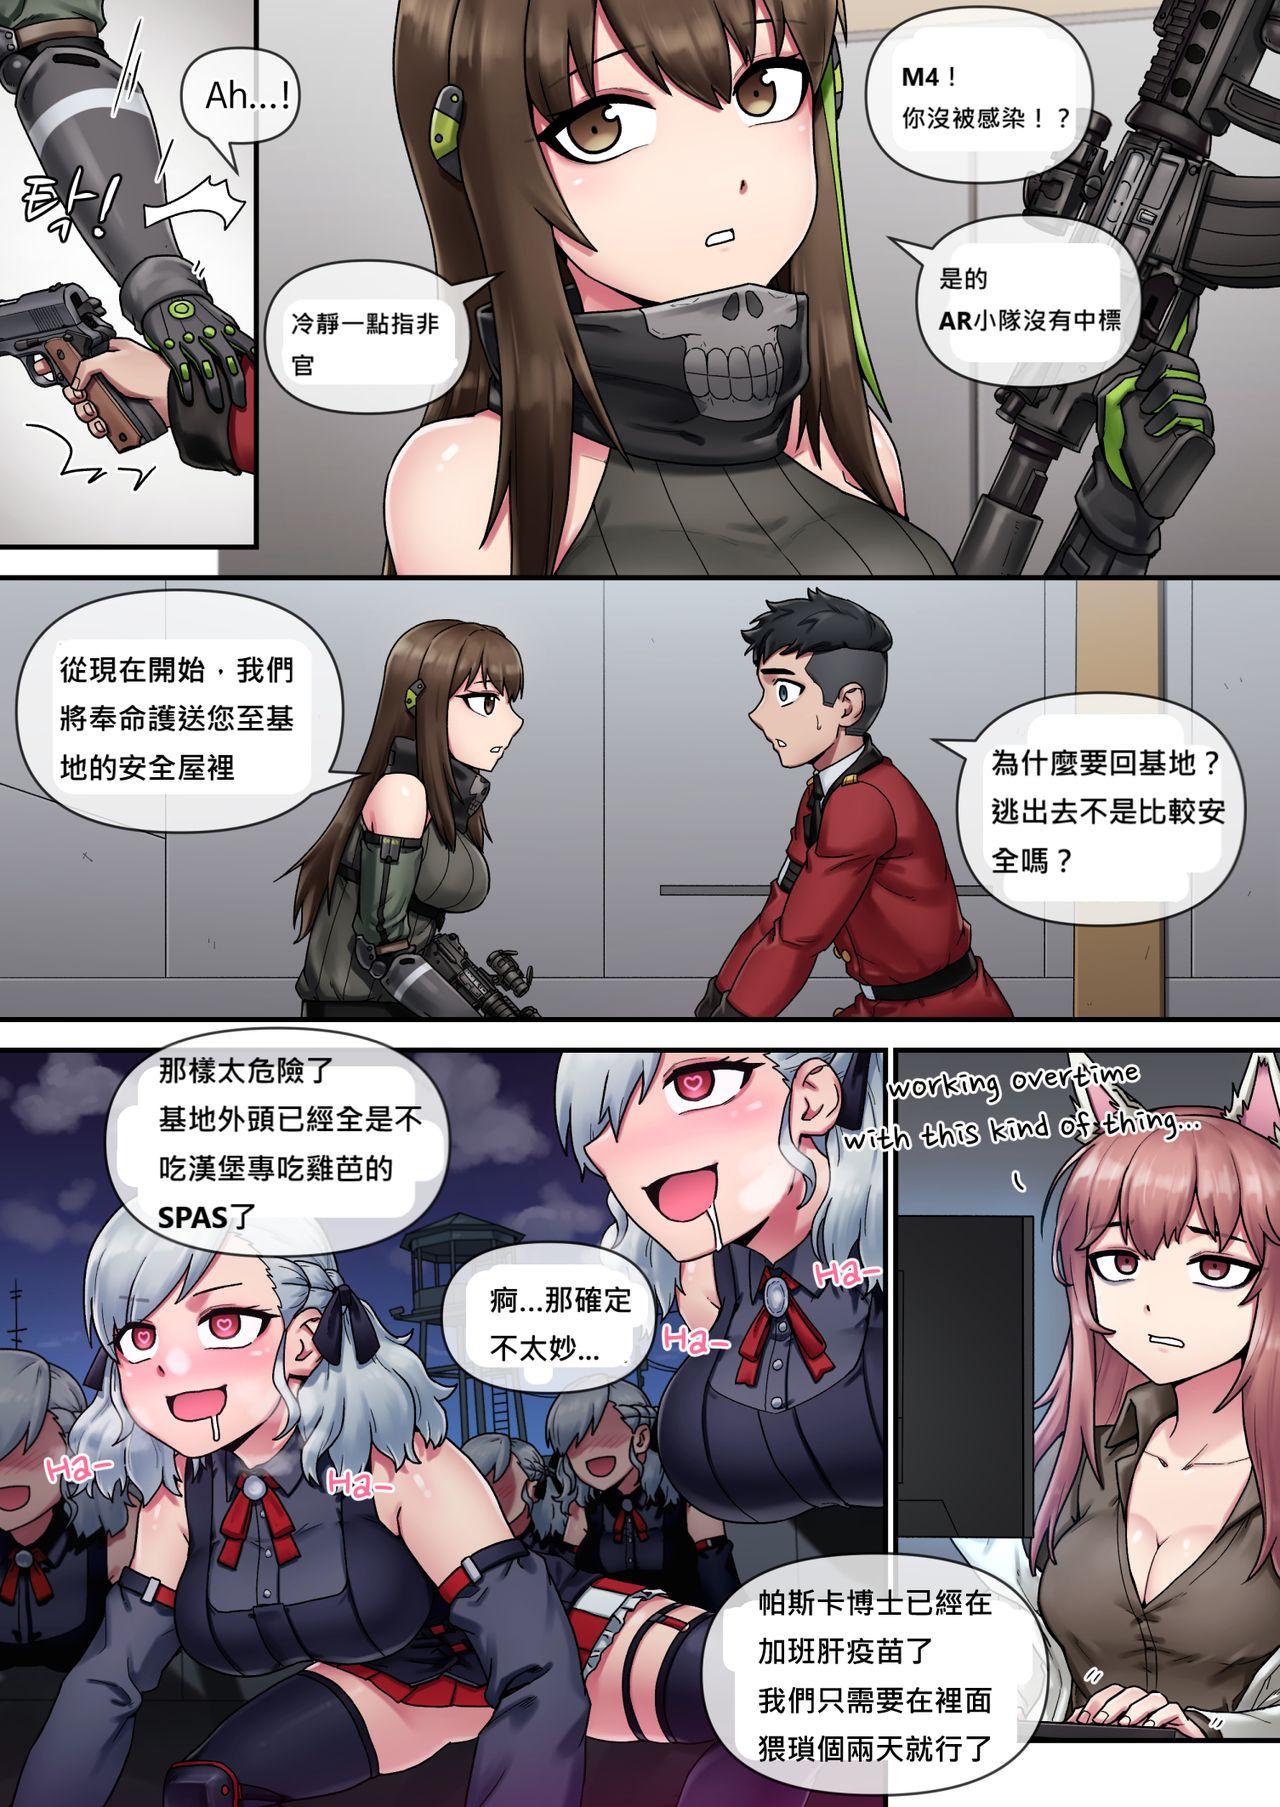 Unshaved My Only Princess - Girls frontline Pee - Page 4